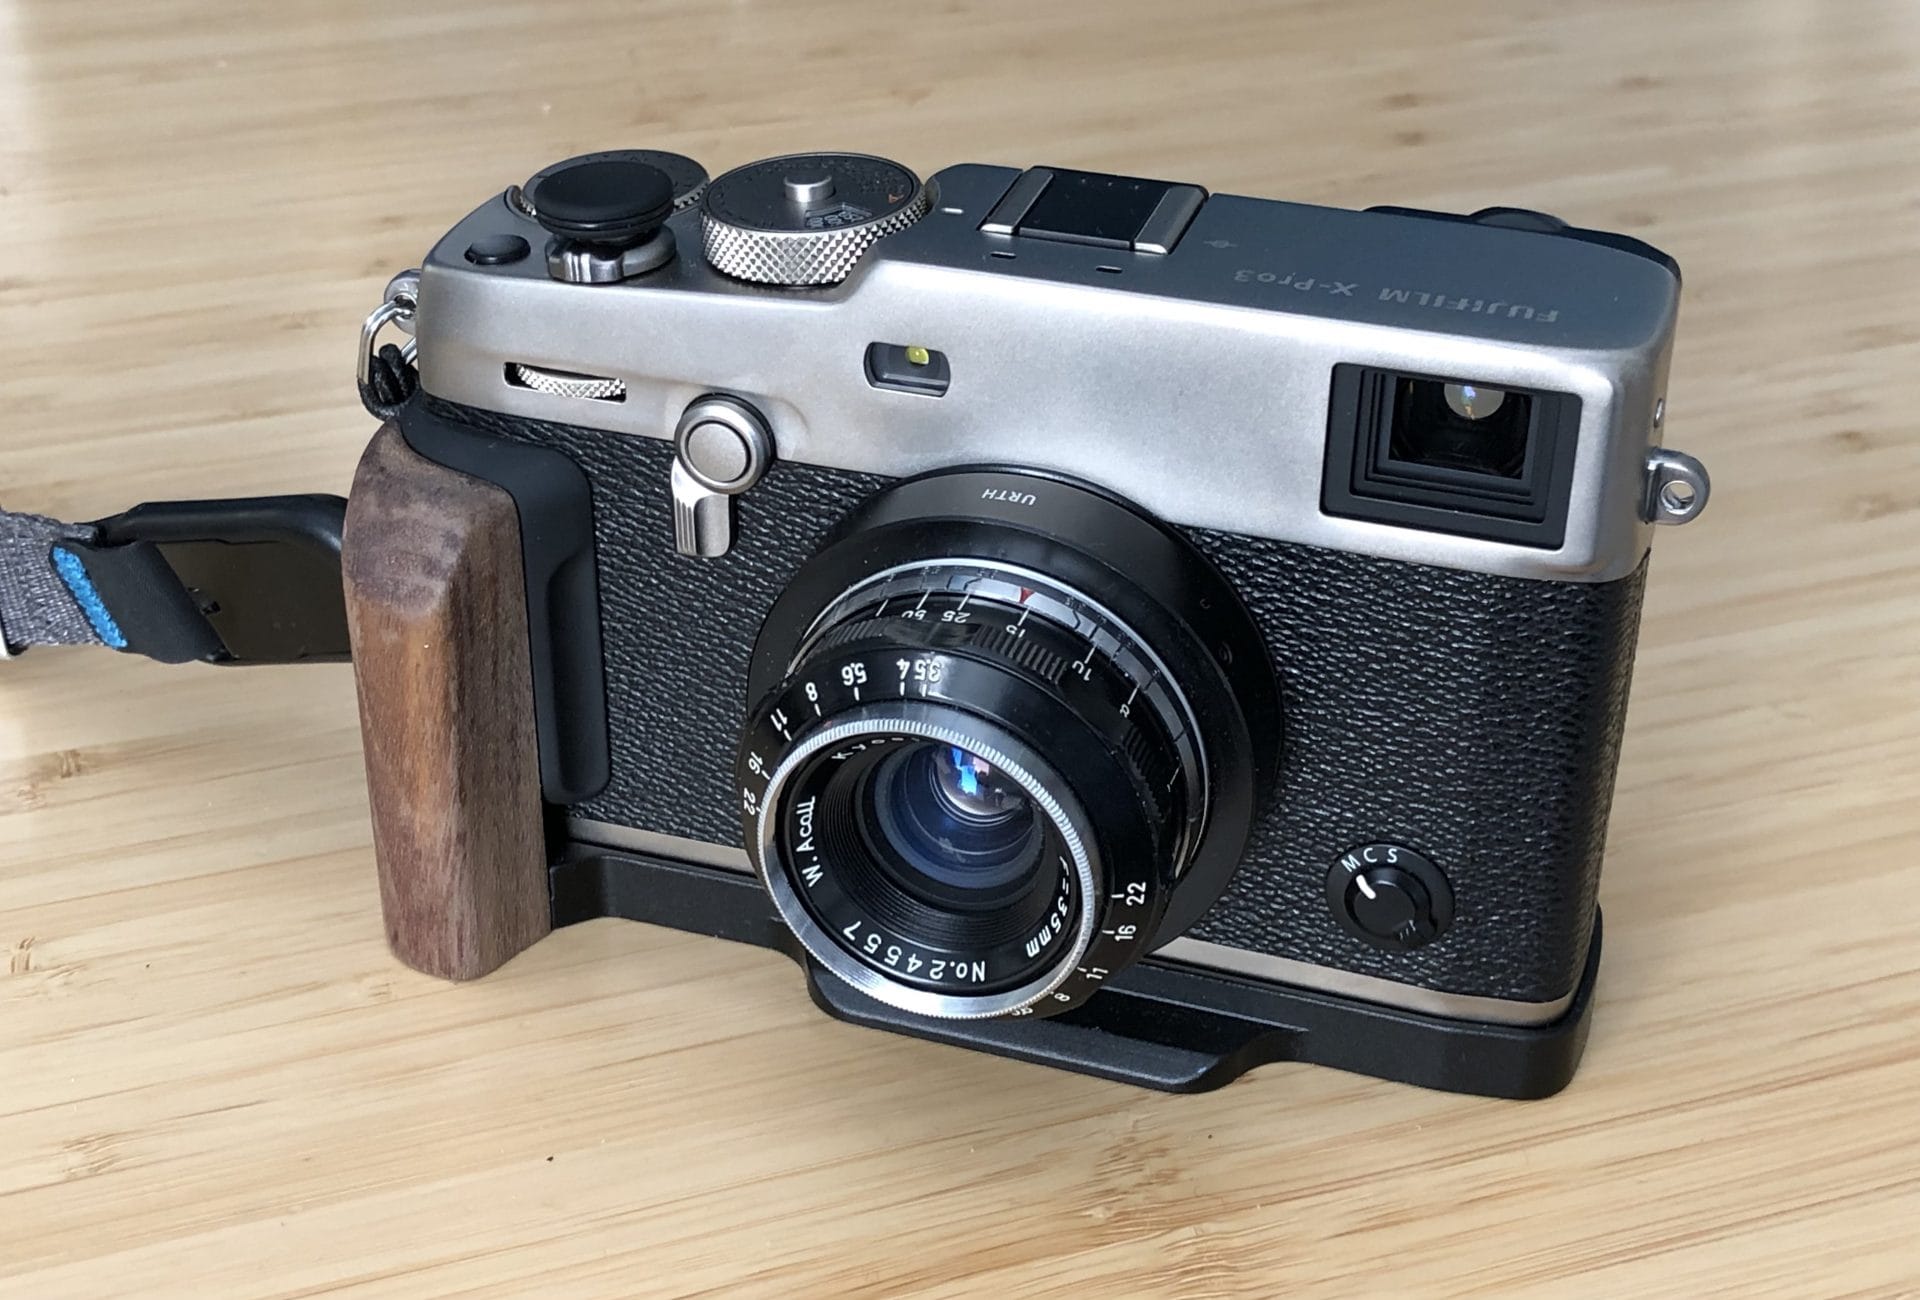 Kyoei W.Acall 35mm LTM (on Fujifilm X-Pro3) Review - A Delightful Daily Walkaround Lens on APS-C